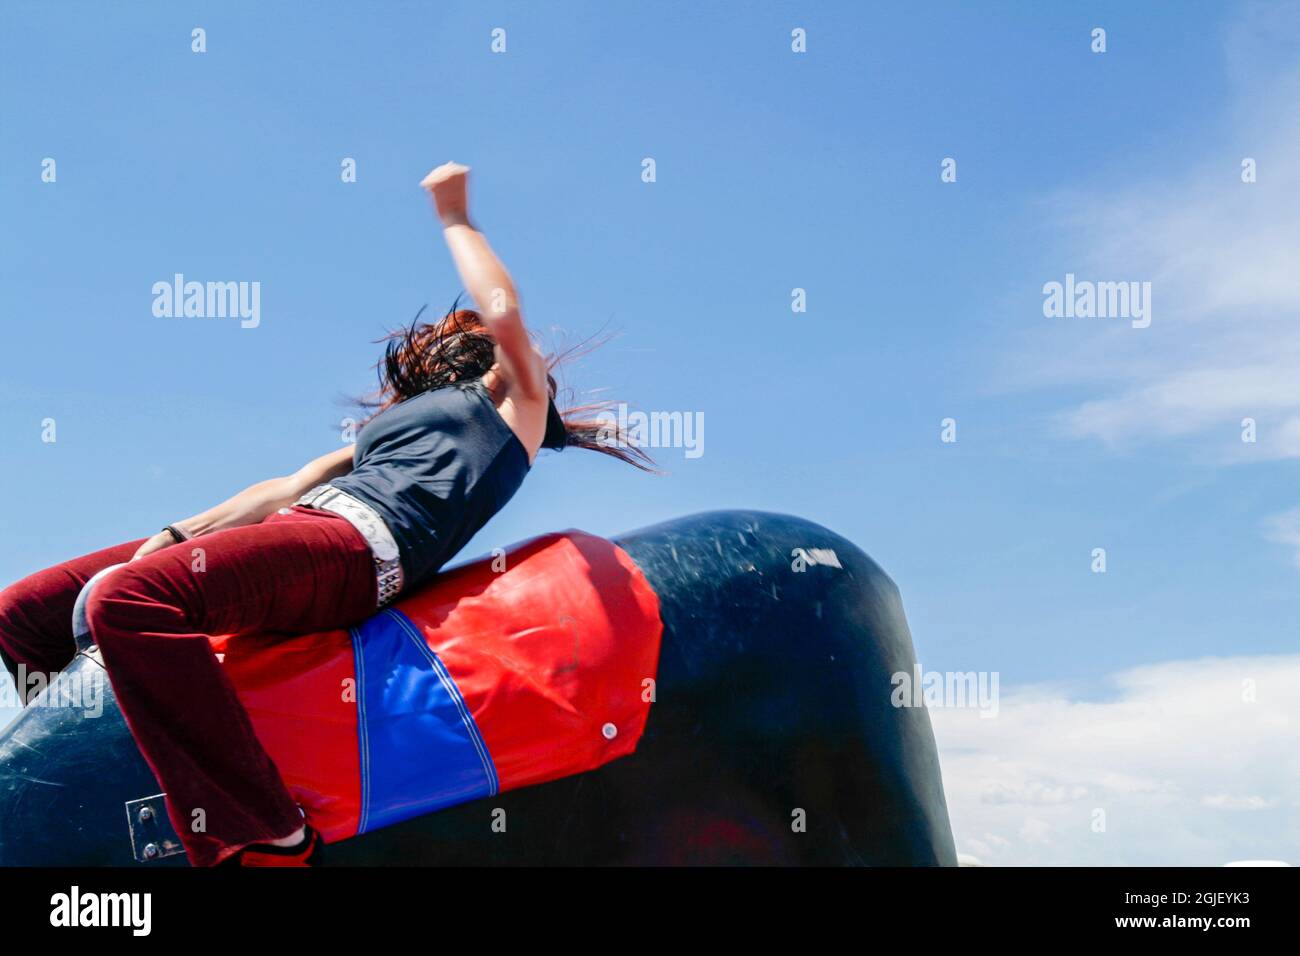 Galisteo, New Mexico, USA. Girl rides mechanical bull at rodeo. Stock Photo